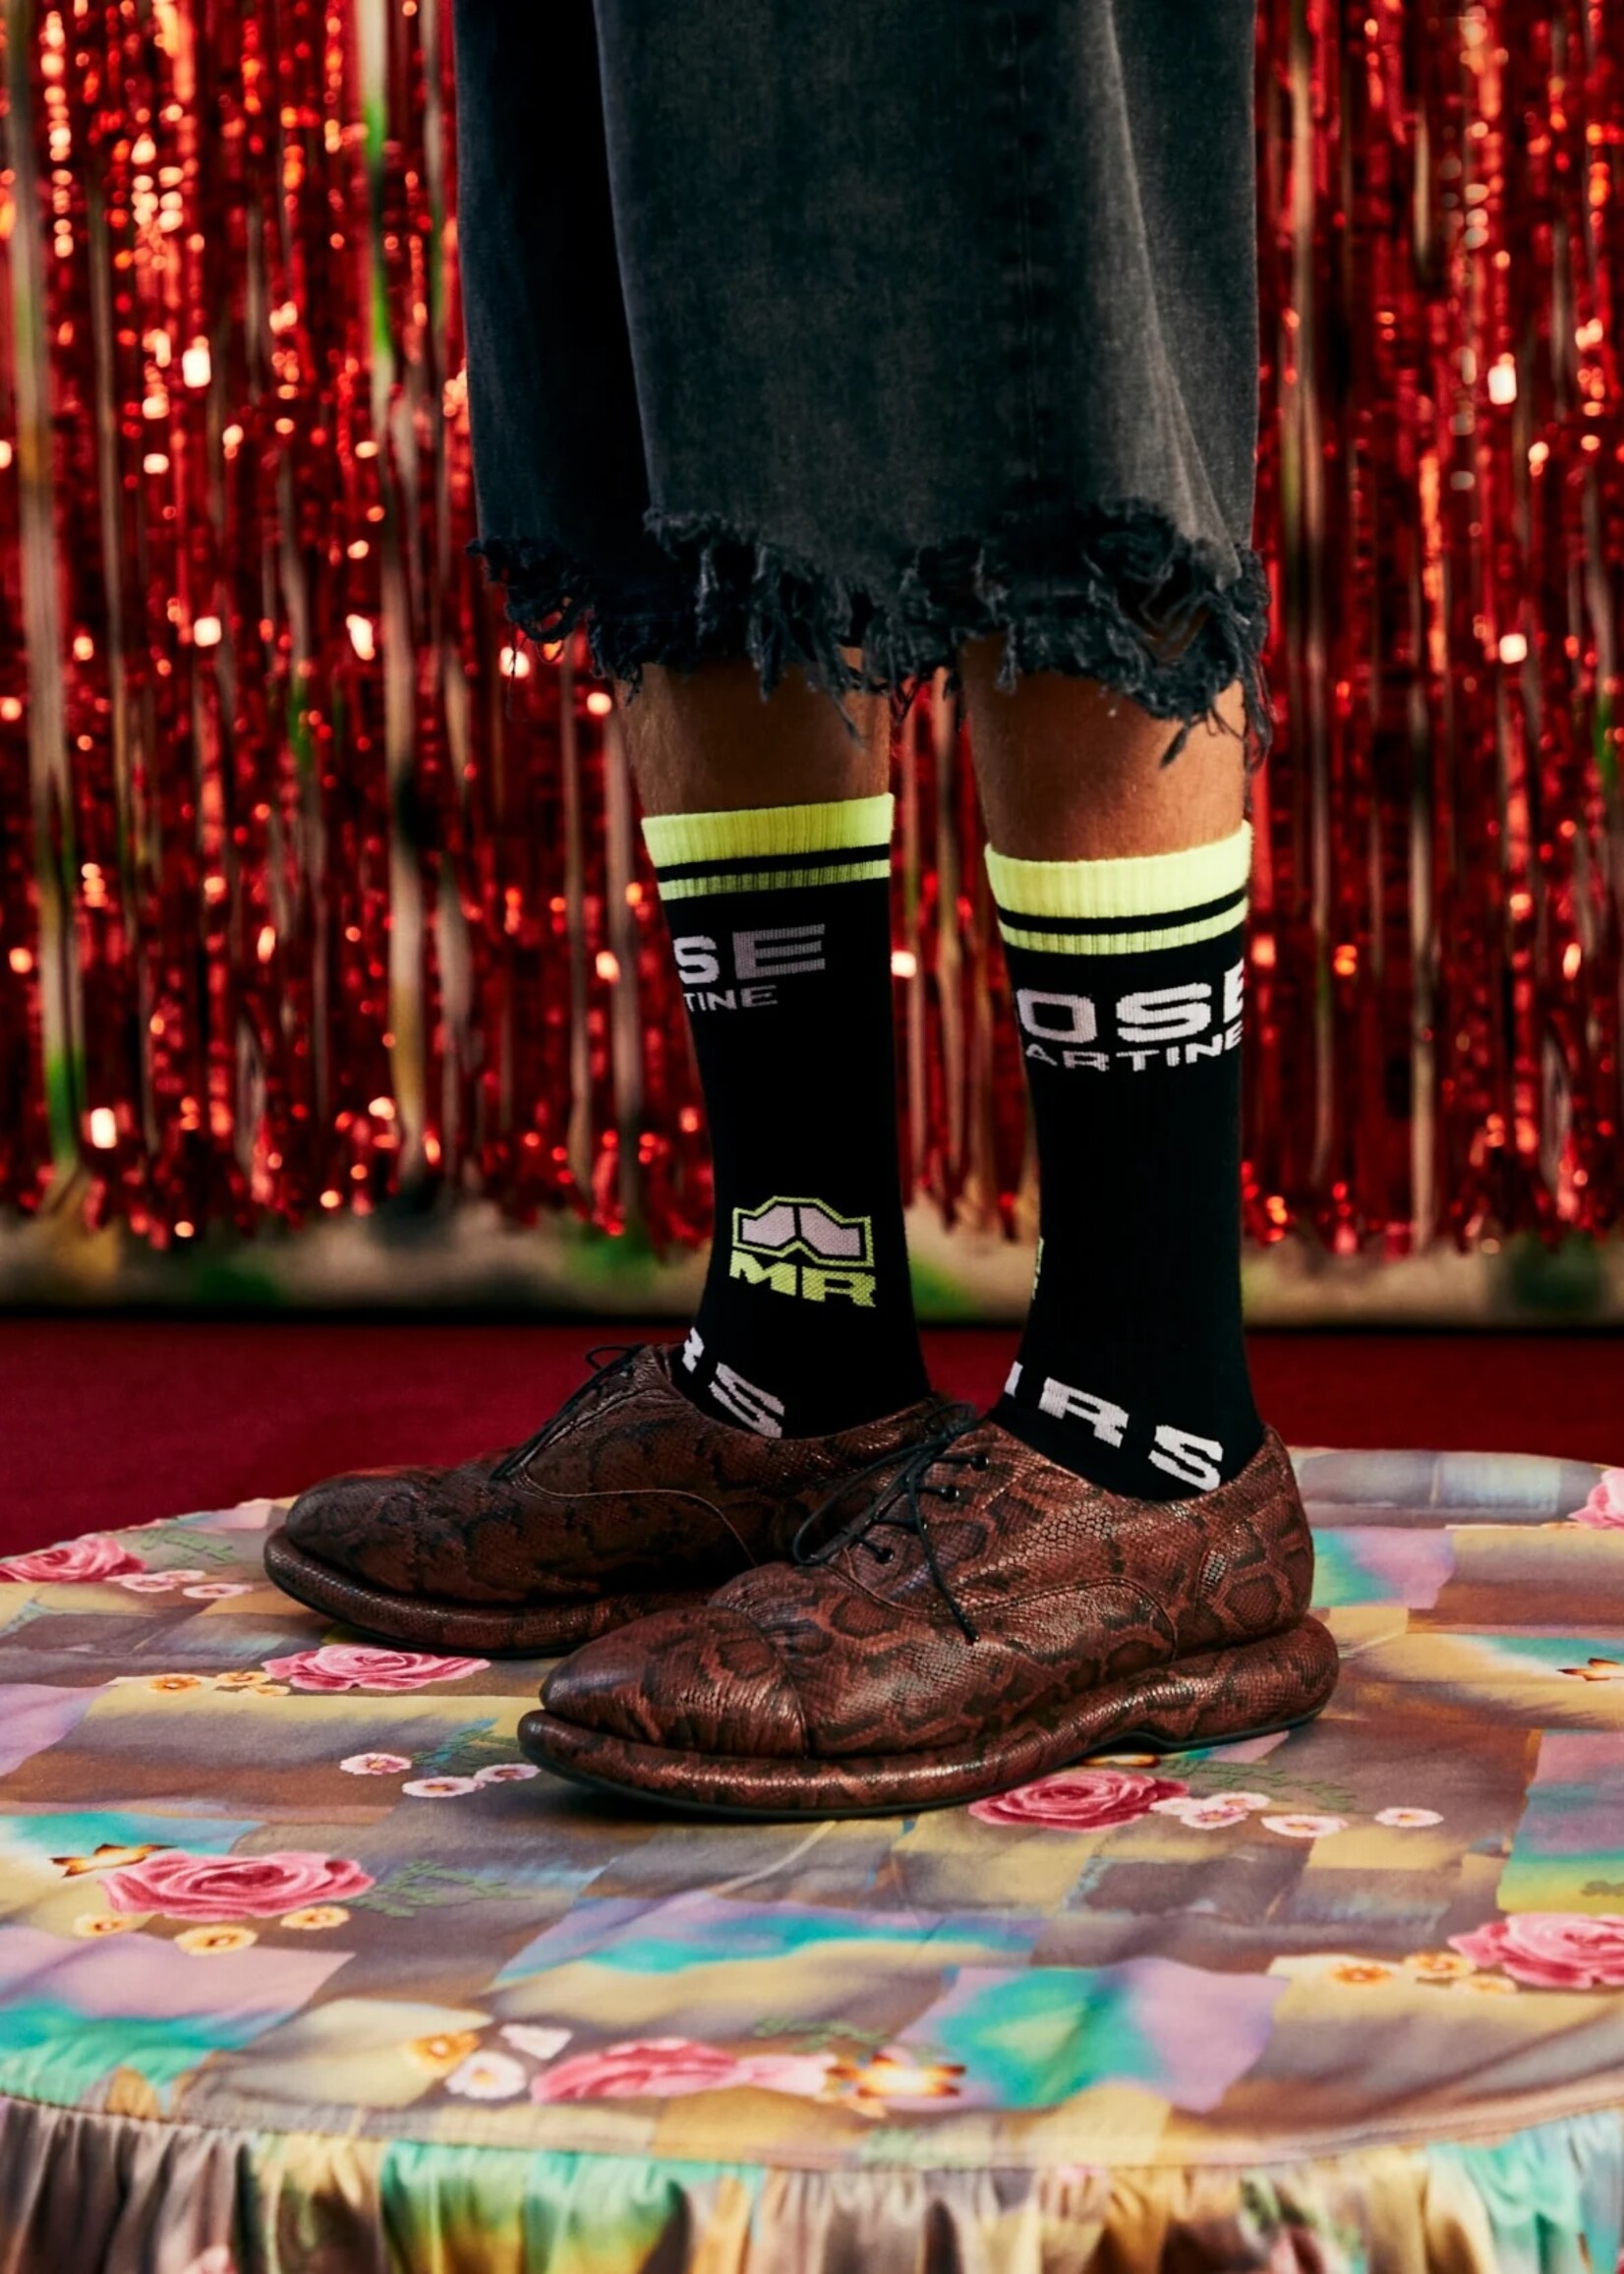 MARTINE ROSE Logo Socks Two Pack in Black and  Neon Yellow